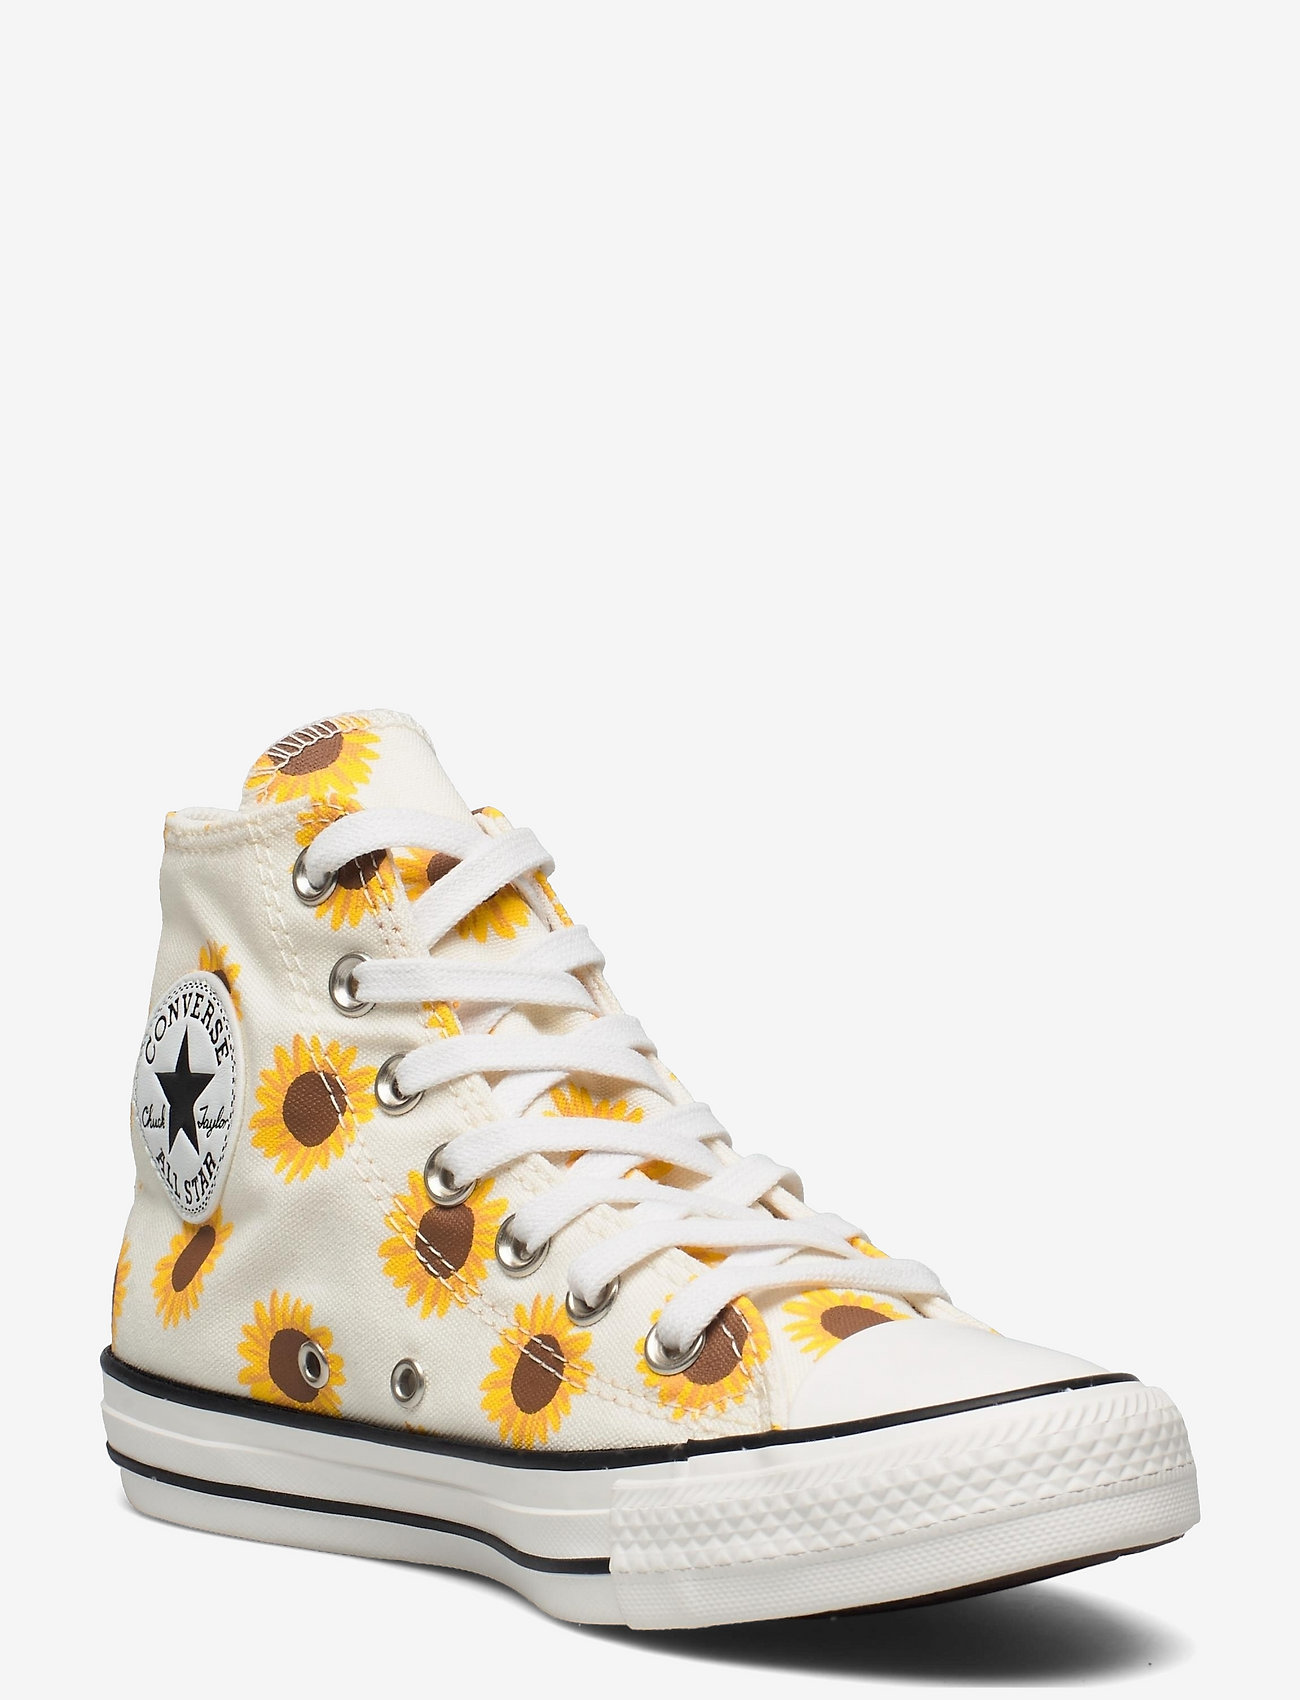 Converse Chuck Taylor All Star - sneakers